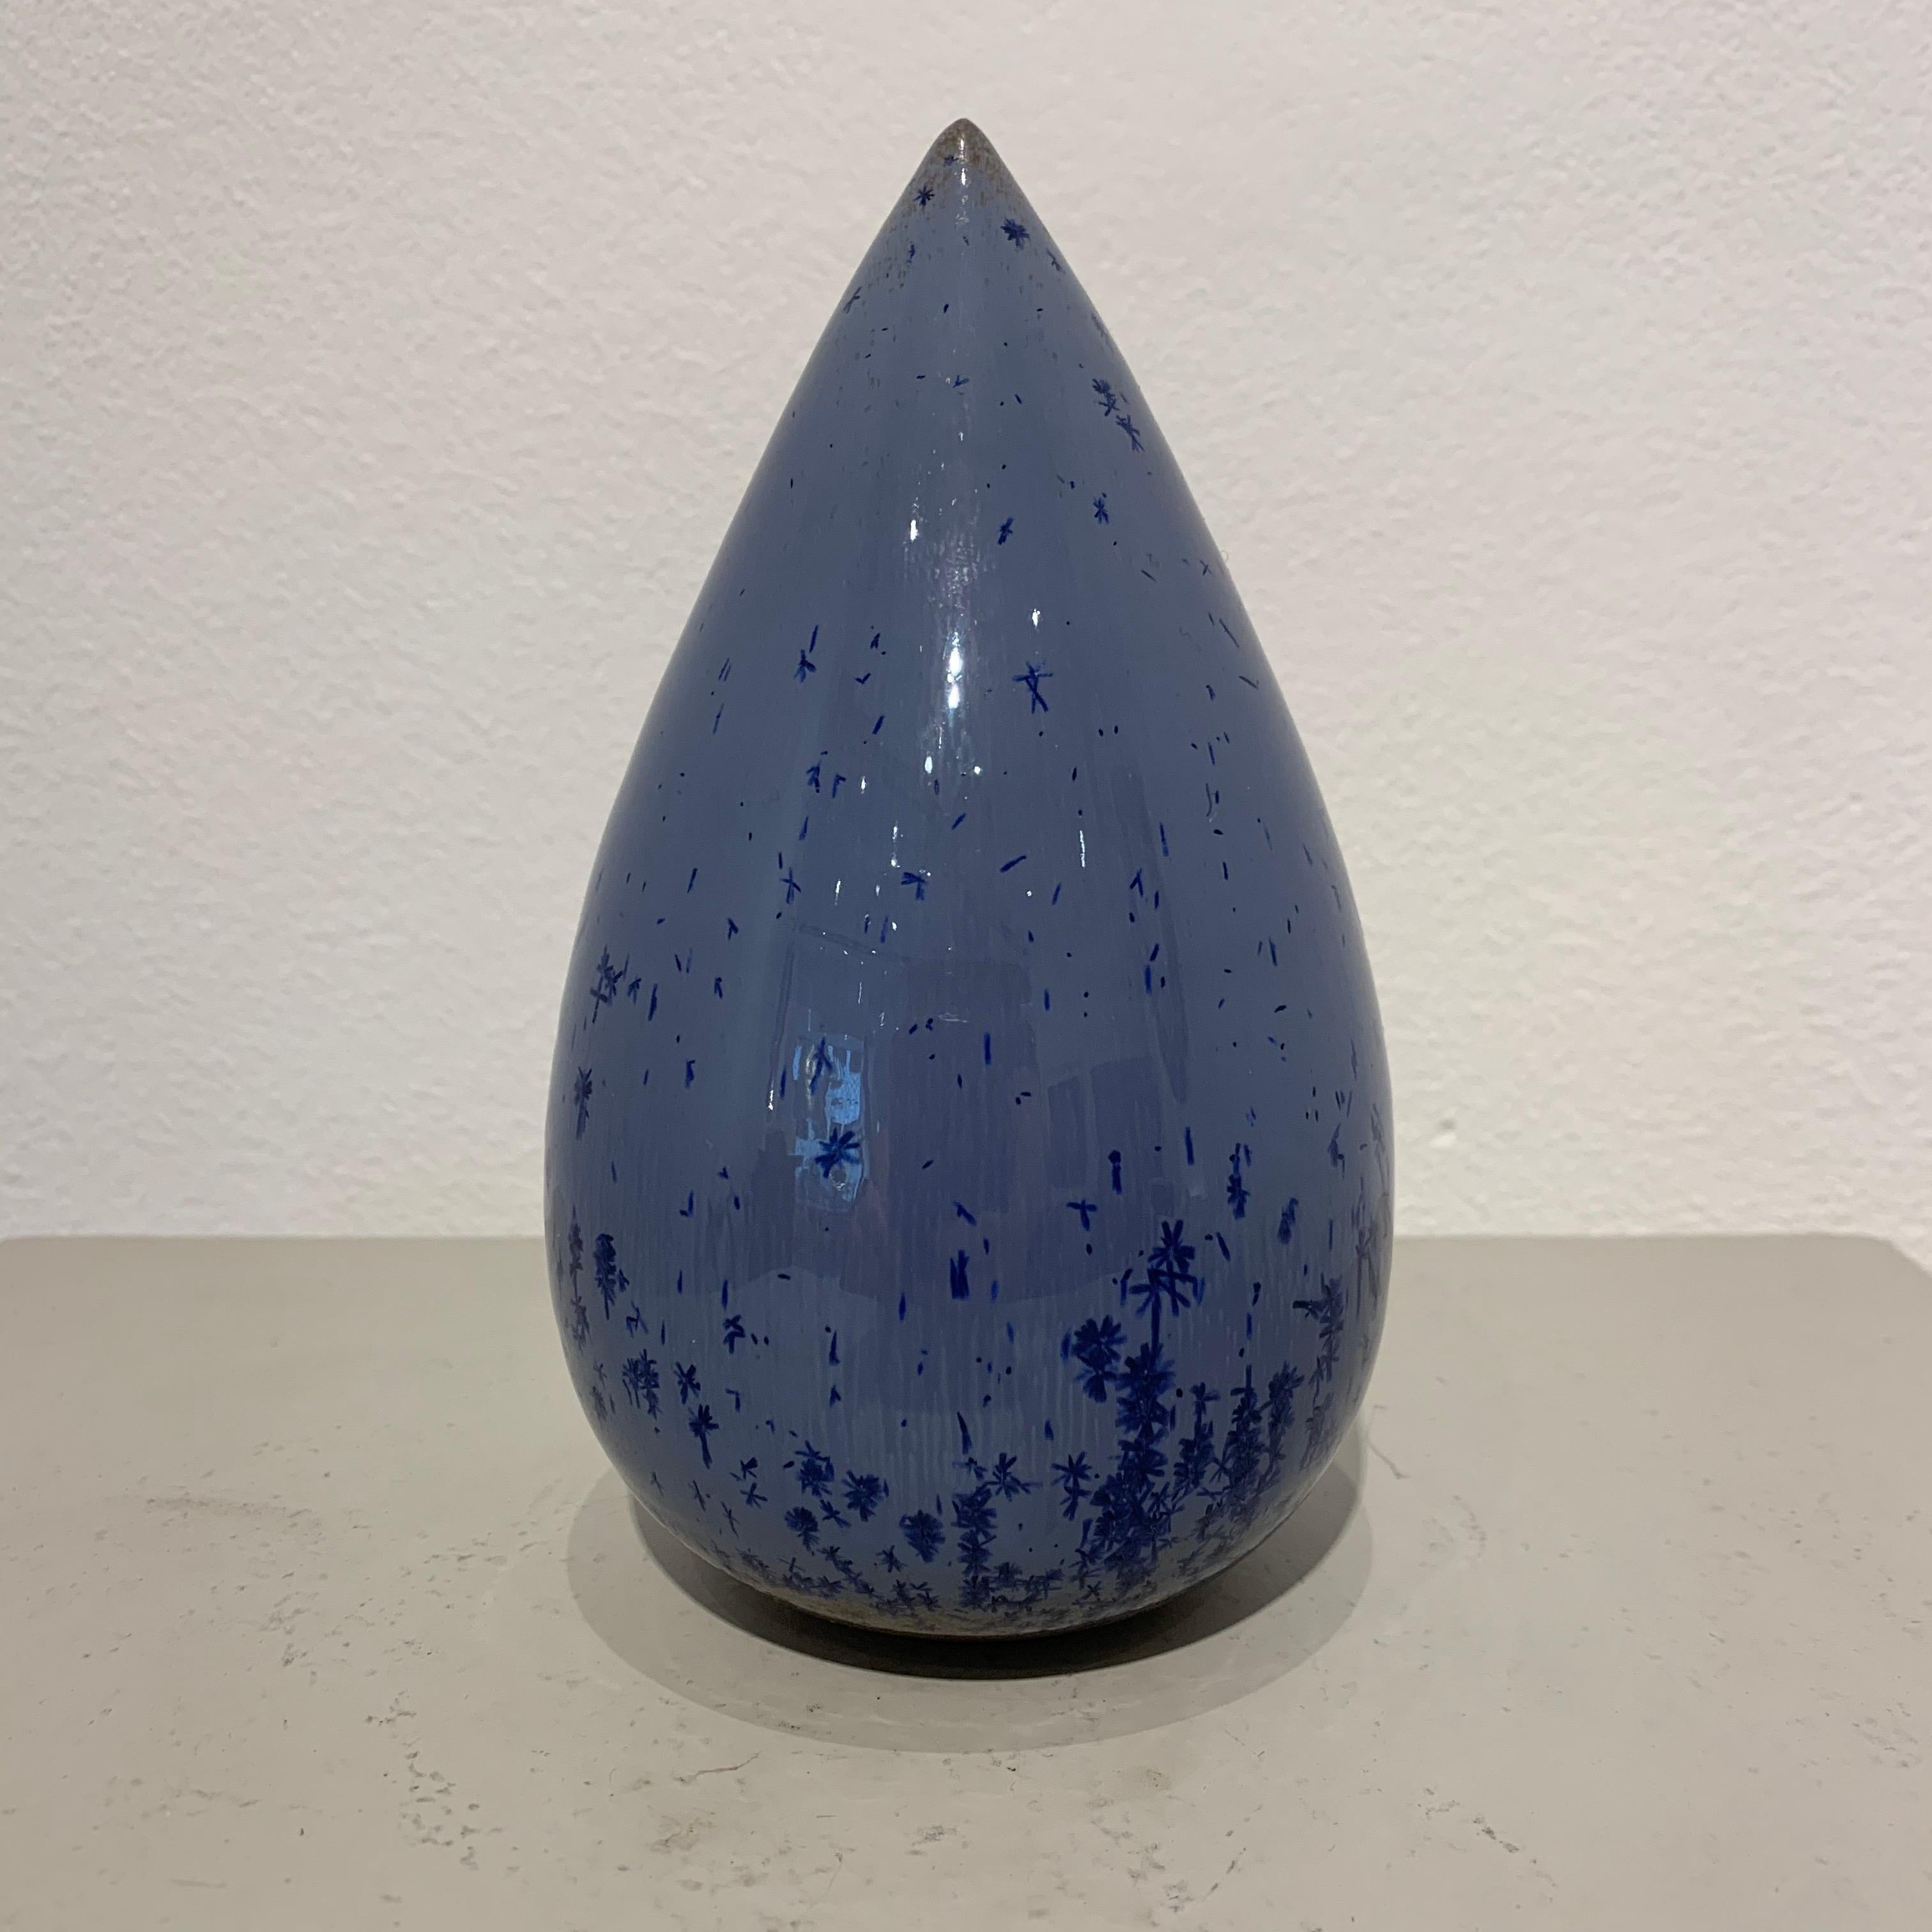 Antonio Lampecco is Belgian Ceramist. He produced ceramics inspired by Japanese forms of ceramics. He pushed the exploration of the glaze to its perfection. His ceramics are to be considered as works of art.